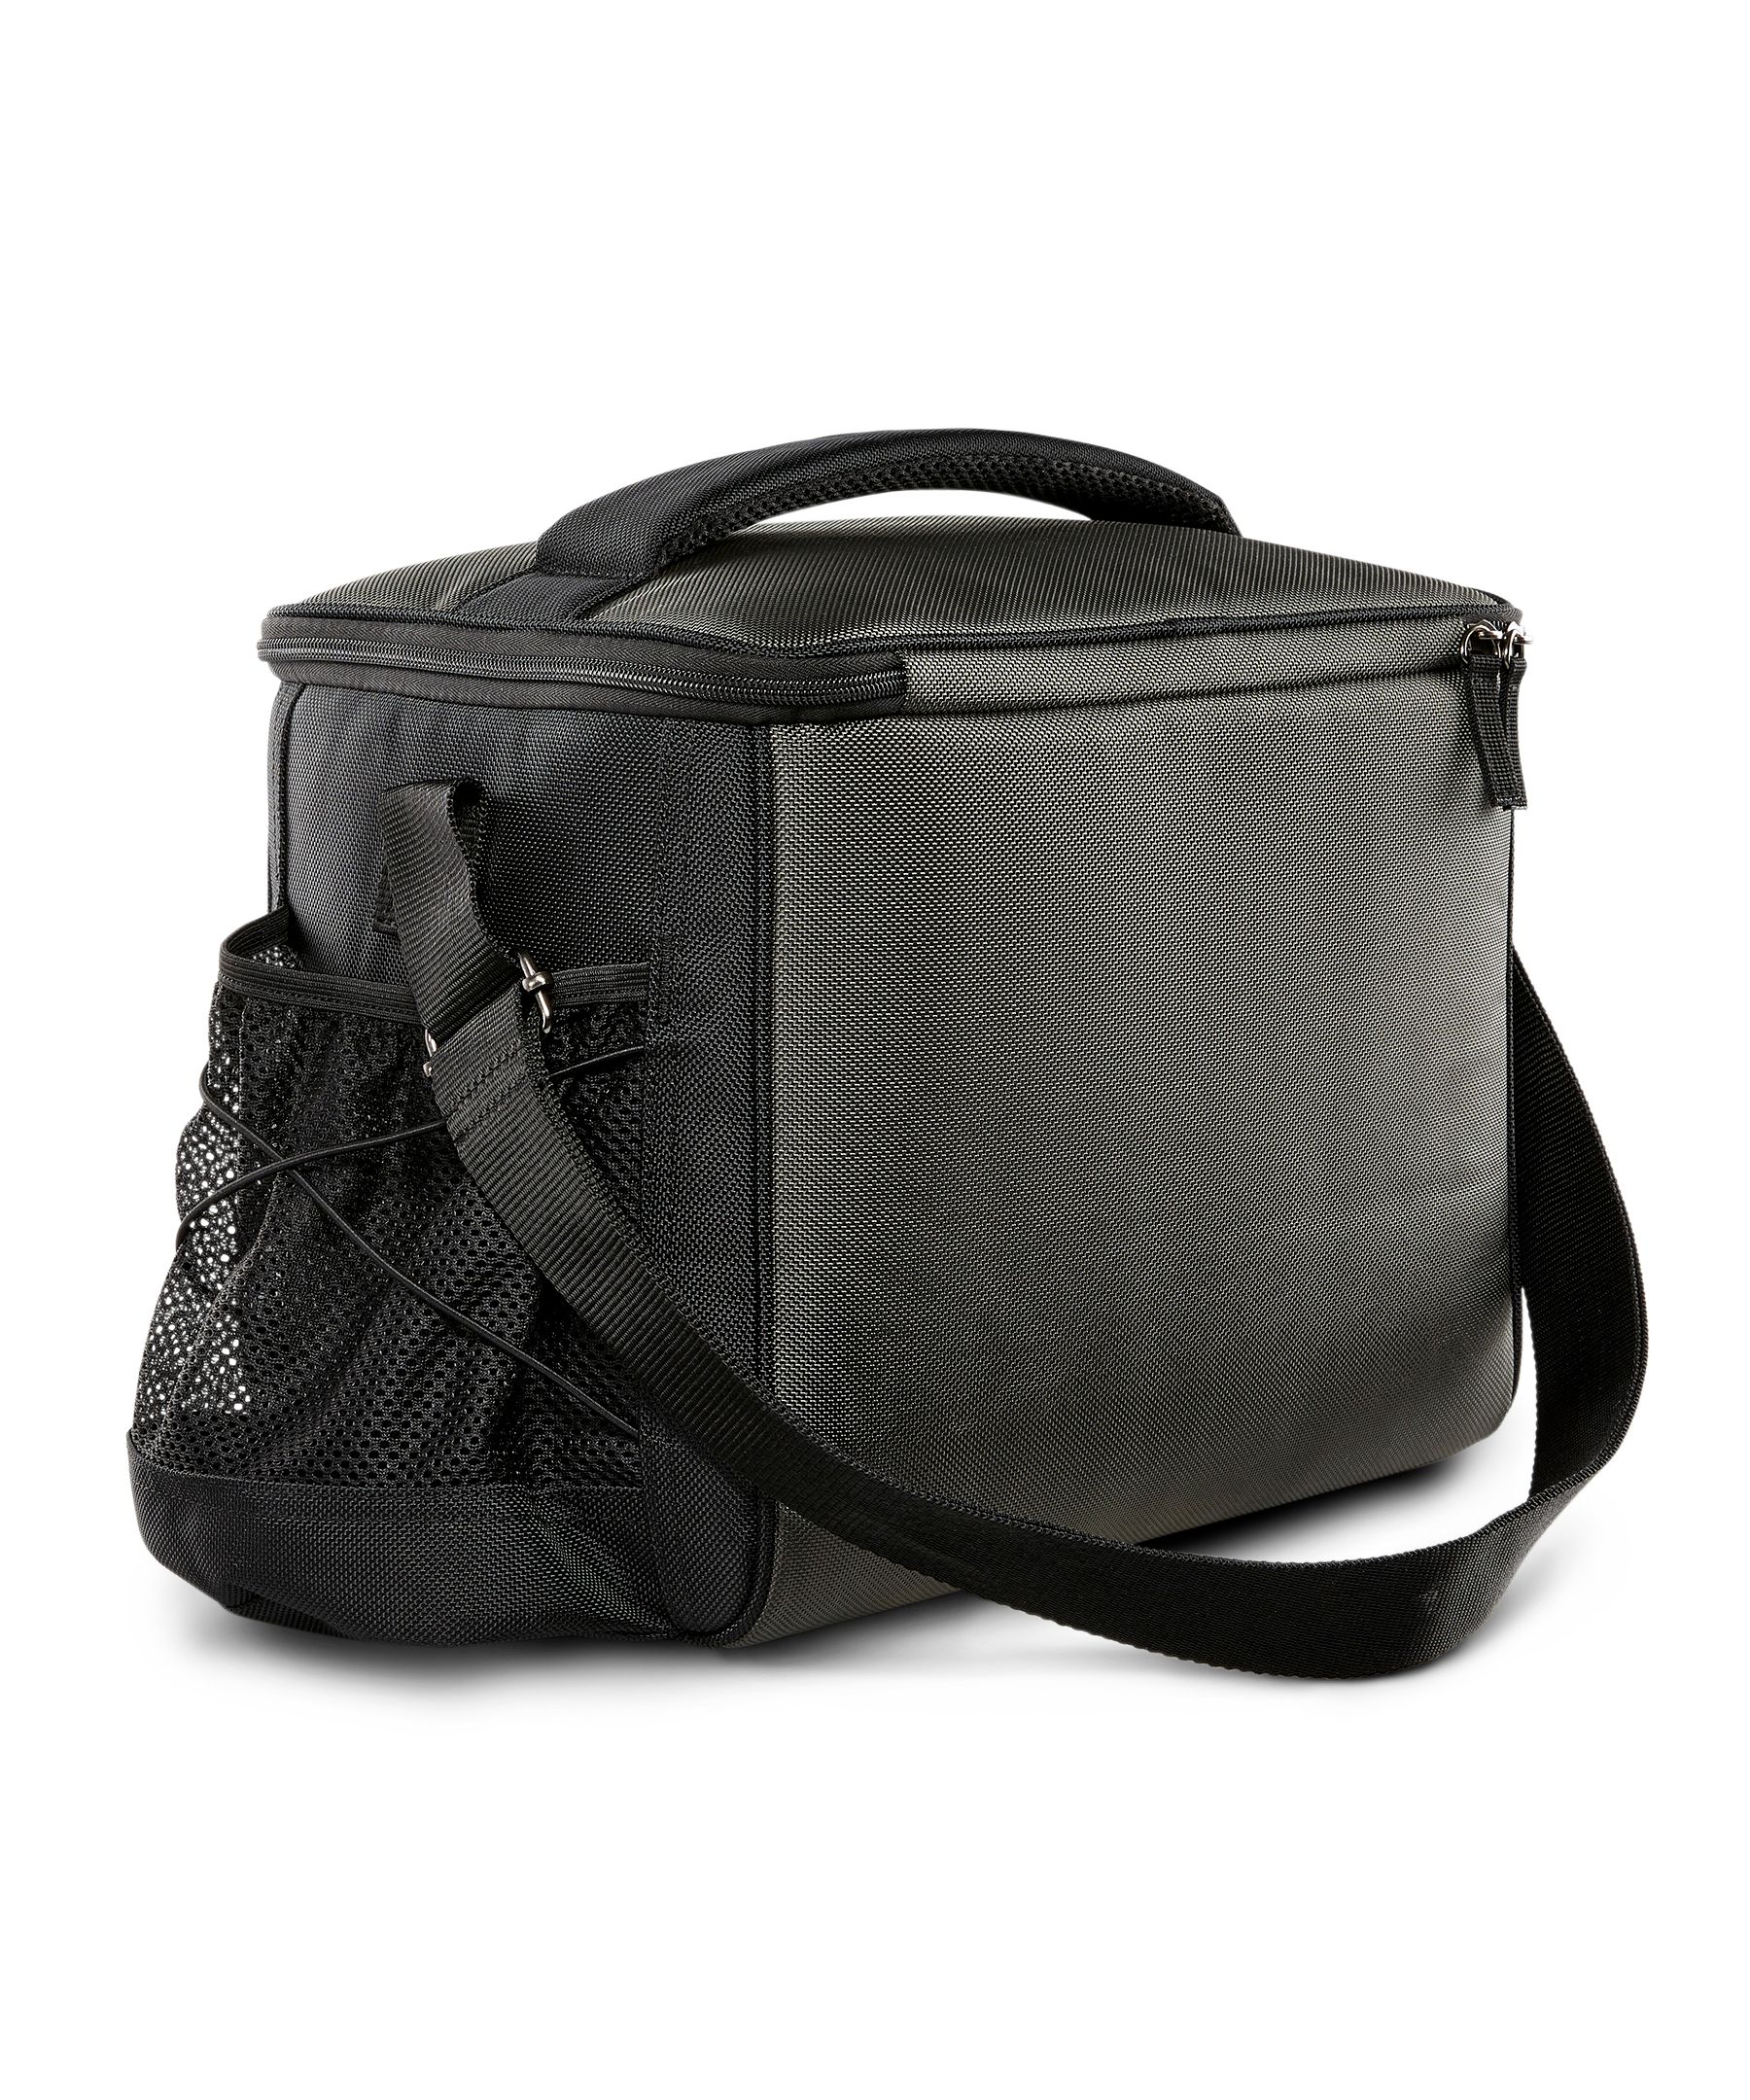 https://media-www.marks.com/product/marks-work-wearhouse/industrial-world/mens-accessories/410035834158/2-way-zip-lunch-bag-with-shoulder-strap-77e06993-98b8-4394-a87d-60e4d7961aef-jpgrendition.jpg?imdensity=1&imwidth=1244&impolicy=mZoom